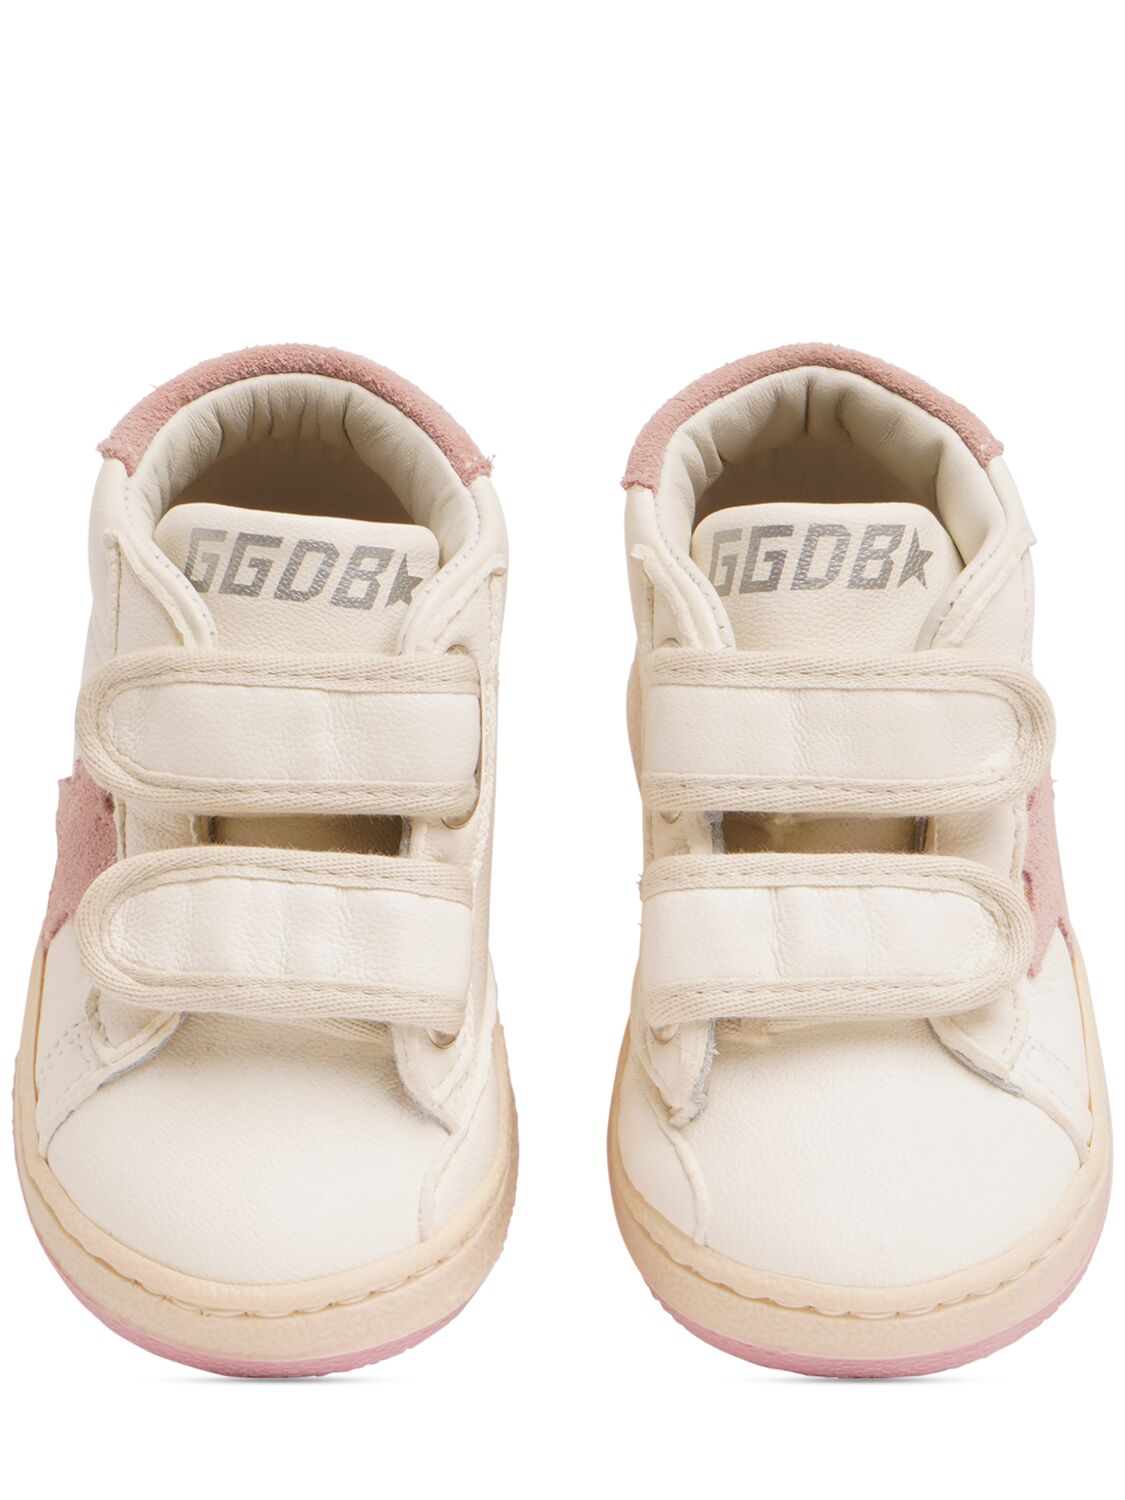 Shop Golden Goose June Strap Leather Star Sneakers In White,pink